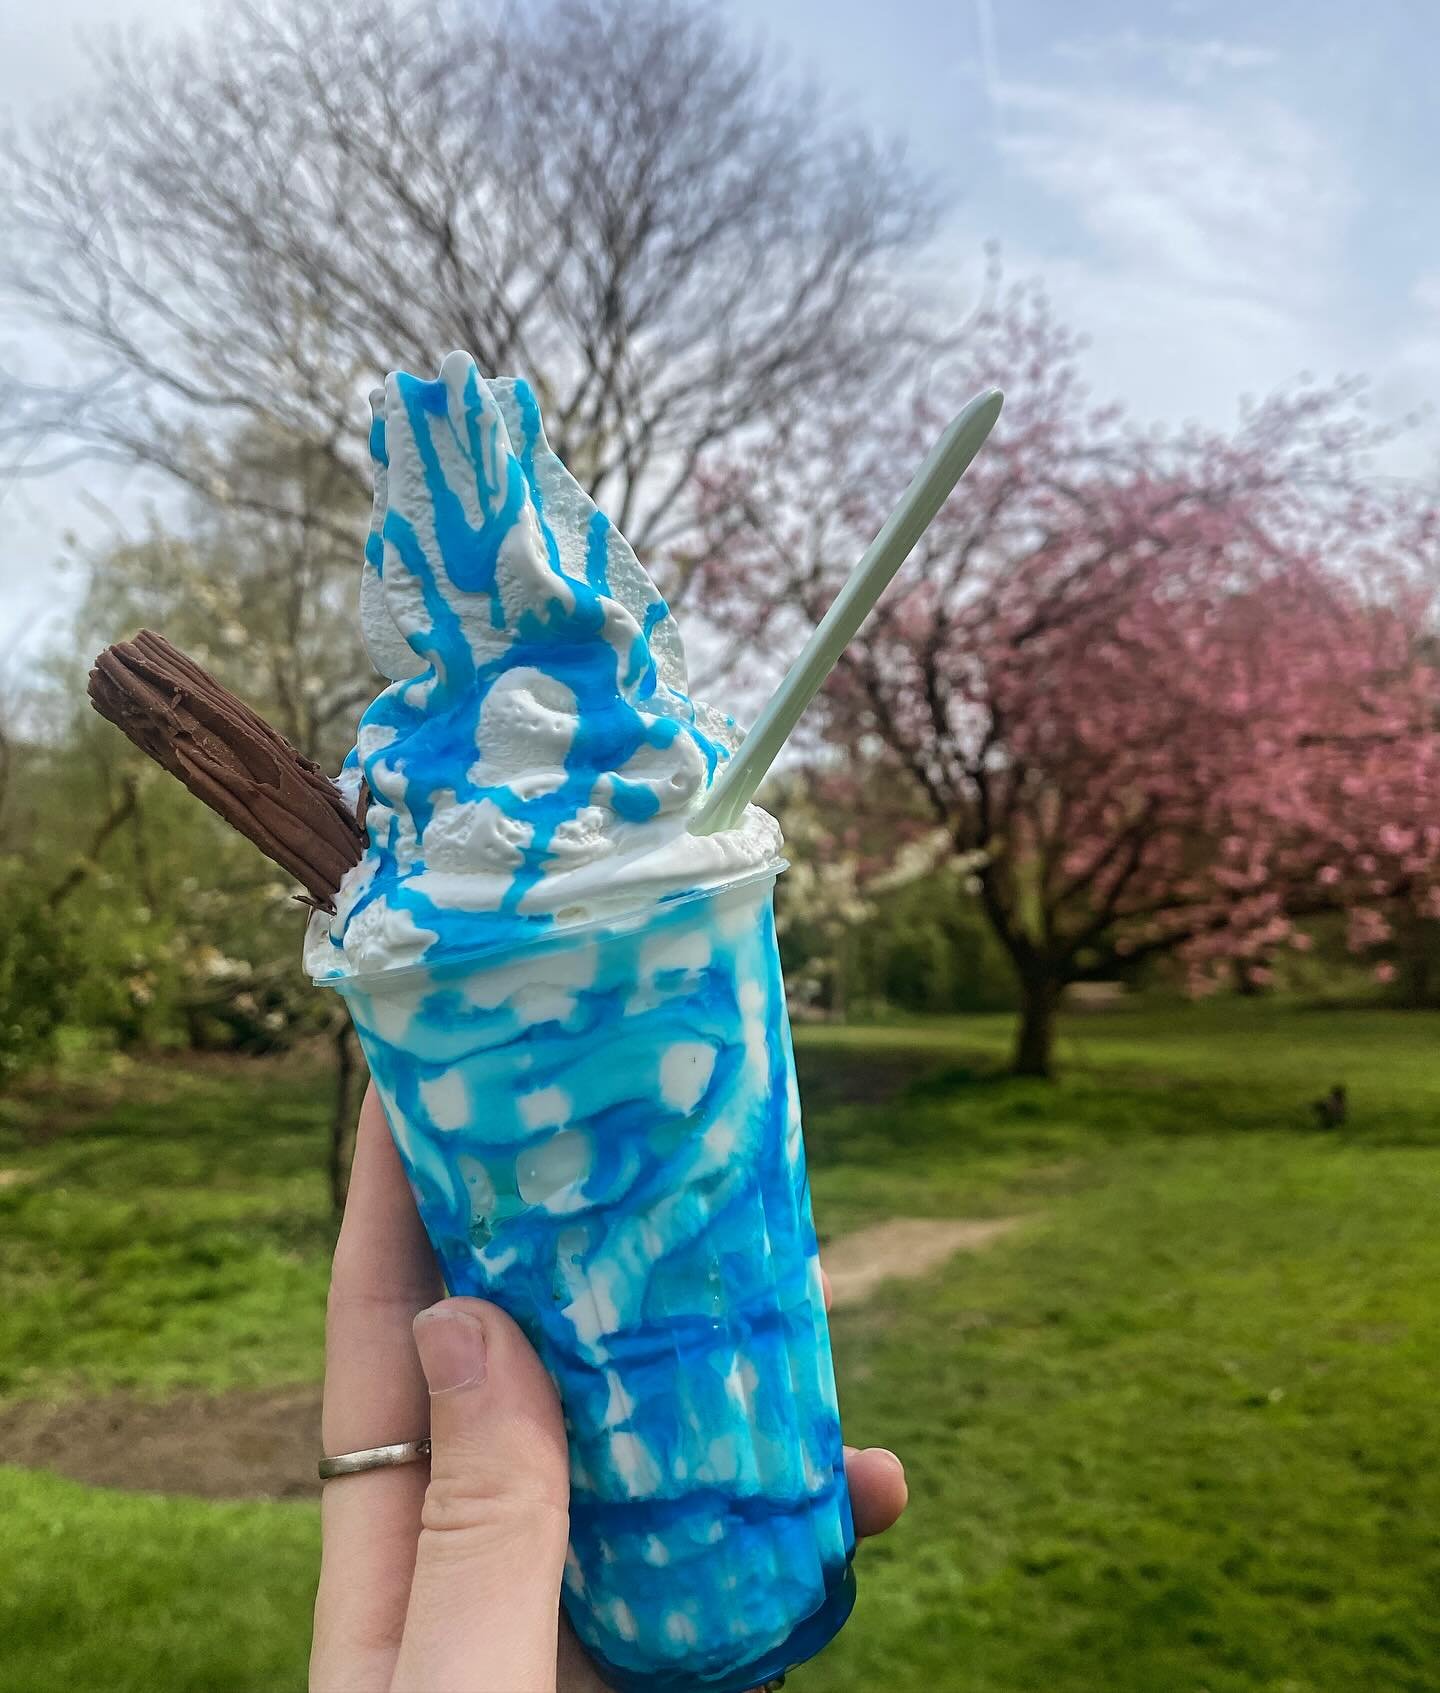 So many pretty colours all in one photo 😍🍦

#lewisbrosicecream #icecream #icecreamlover #flake #icecreamvan #sweet #sweettreats #vanlife #dessert #local #warrington #manchester #manchesterfood #cheshire #warringtonbusiness #desserts #sunny #bubbleg